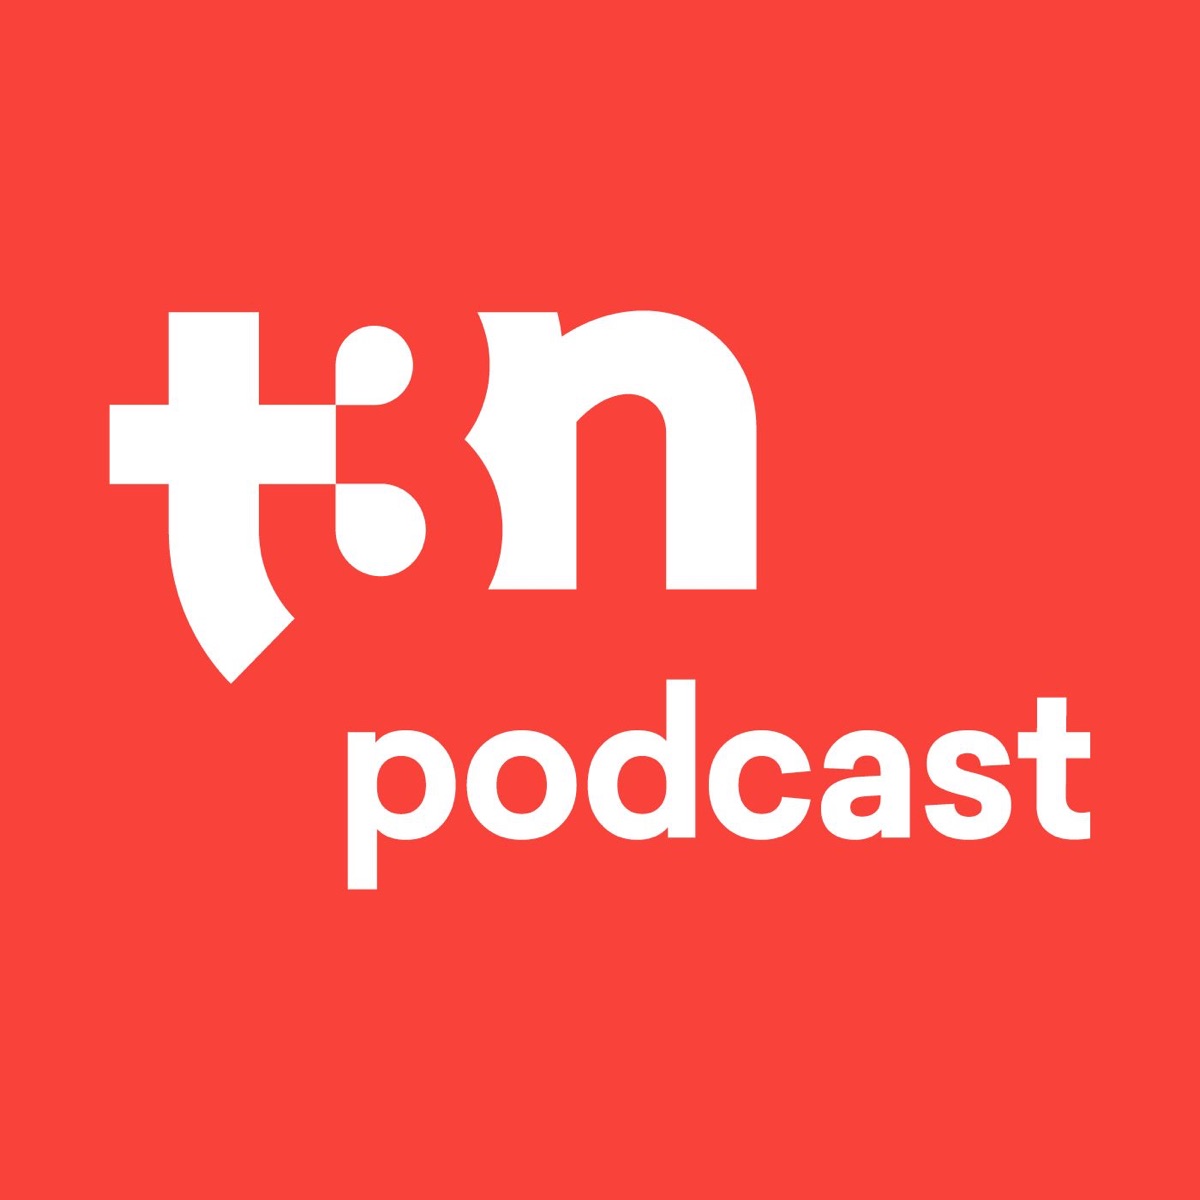 t3n Podcast